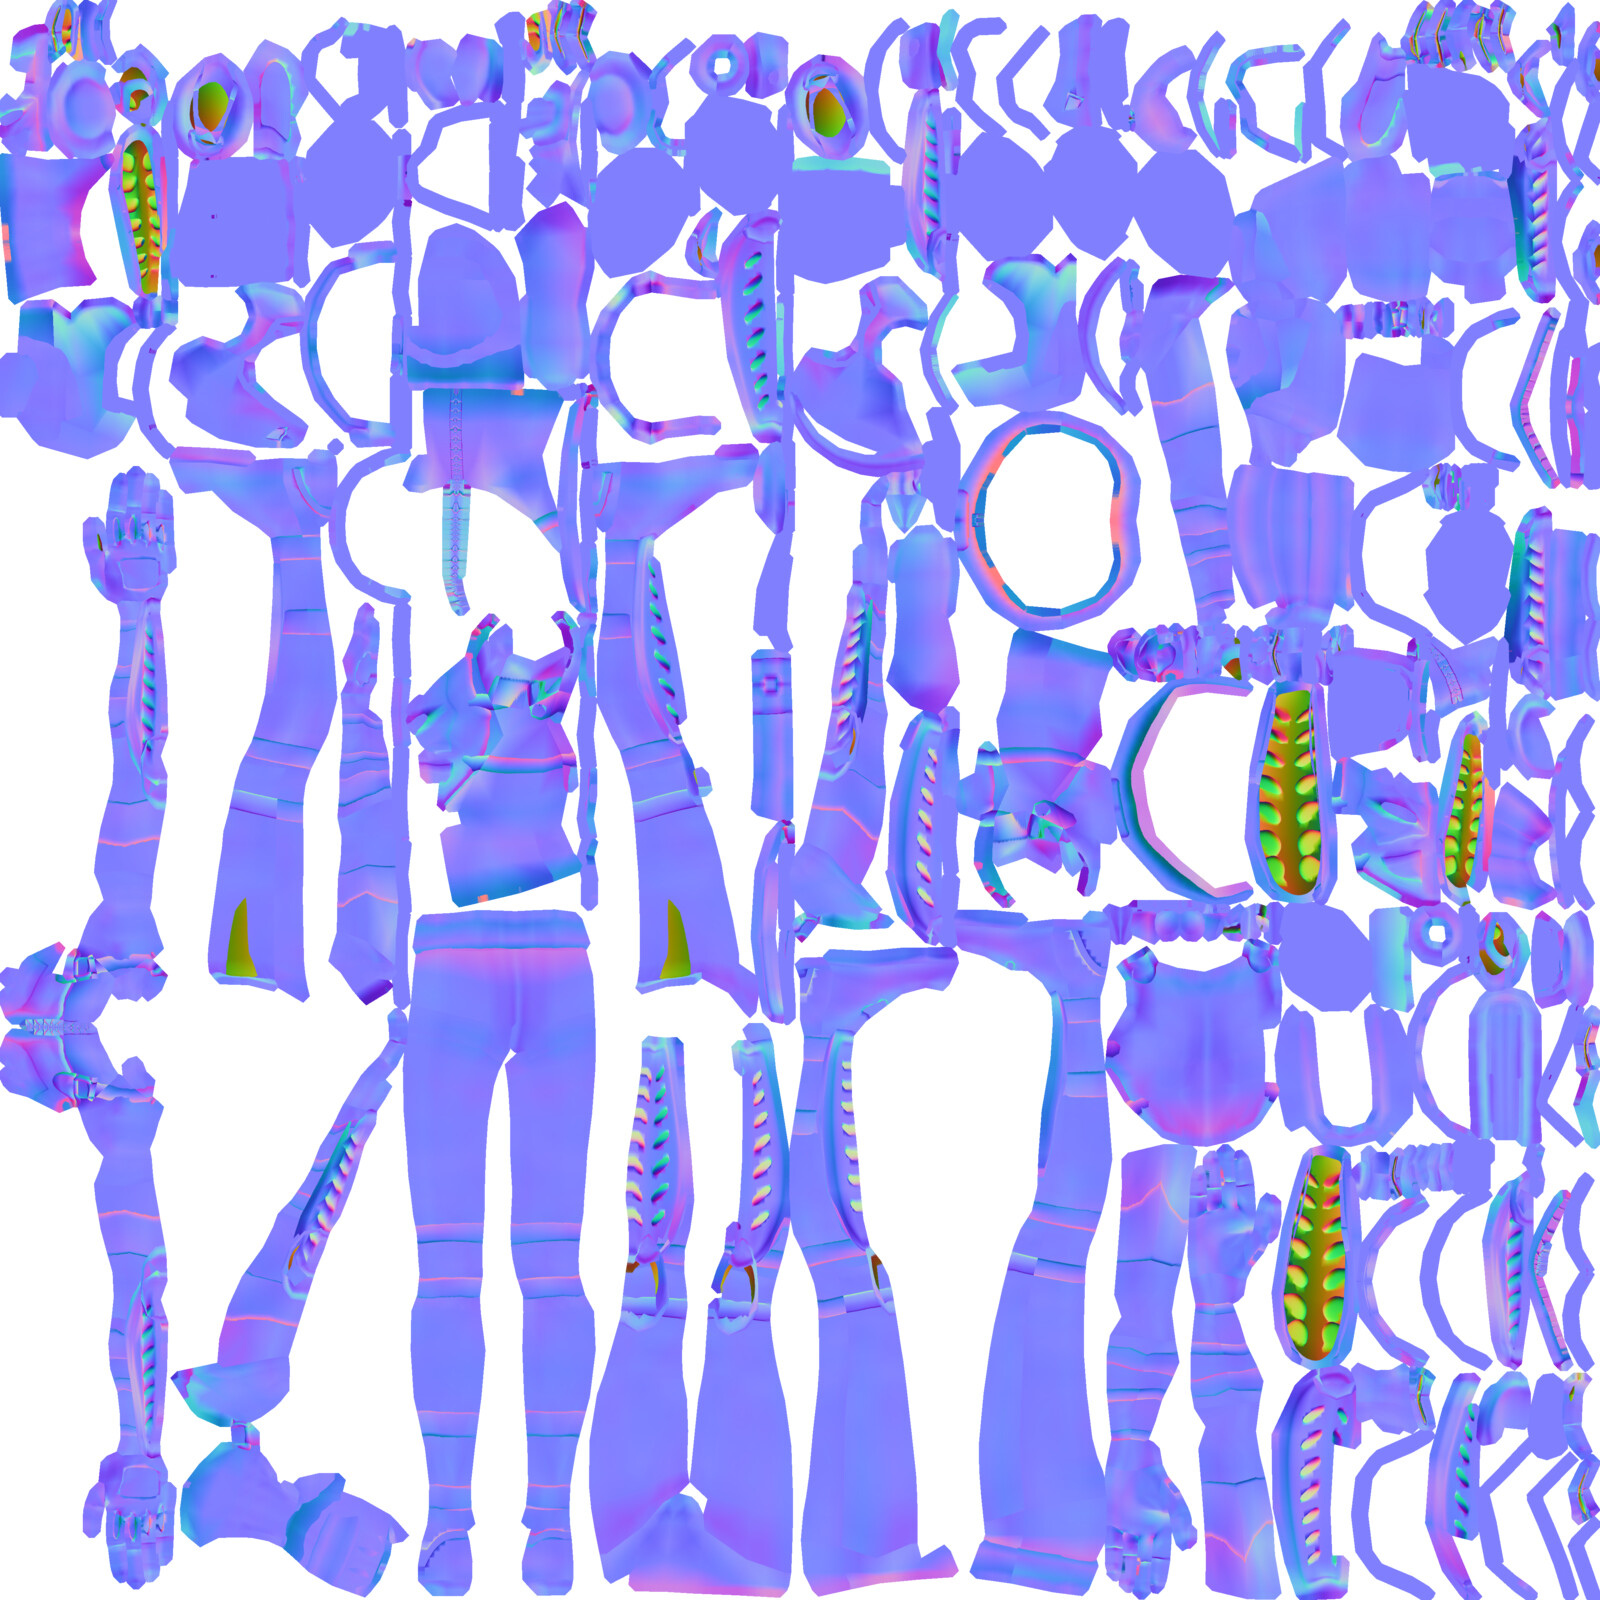 Female player normal map. (The poorly-baked areas are the backs of the shin/wrist guards and shoulder/knee pads. As such, they are not visible on the textured character.)